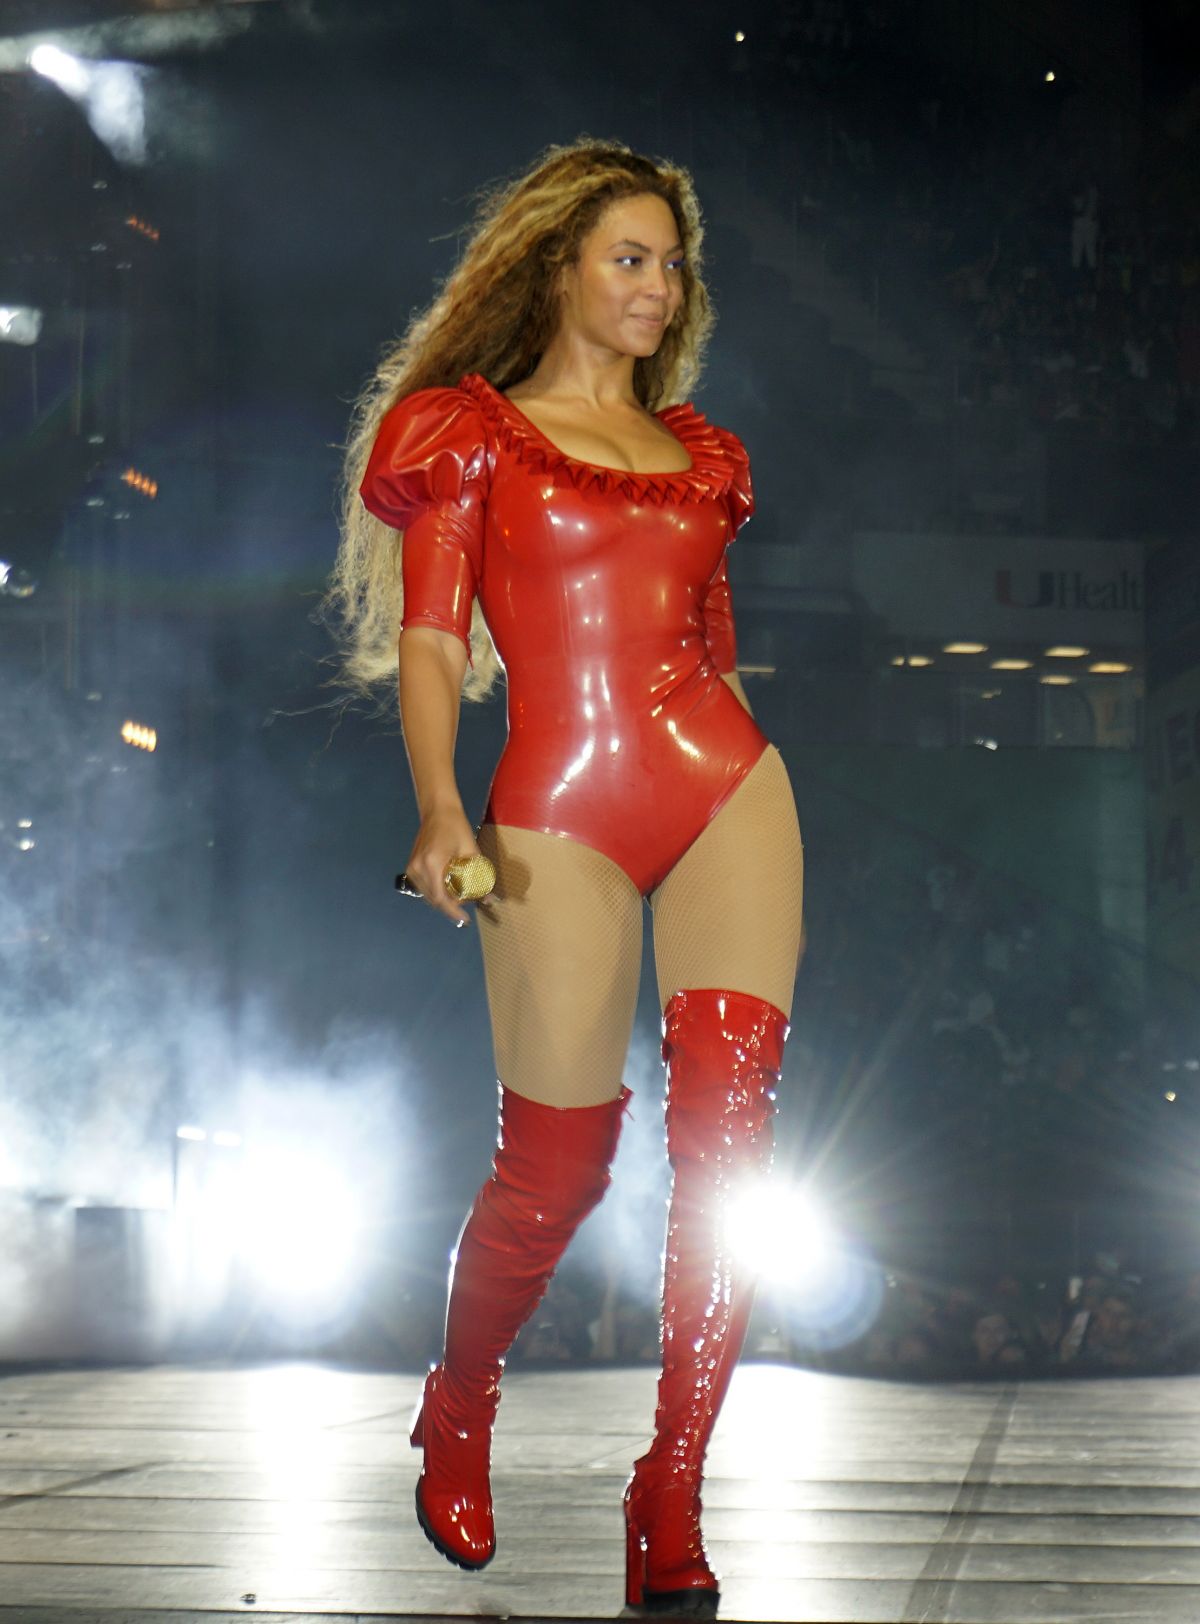 BEYONCE Performs at a Concert in Miami 04/27/0016 HawtCelebs